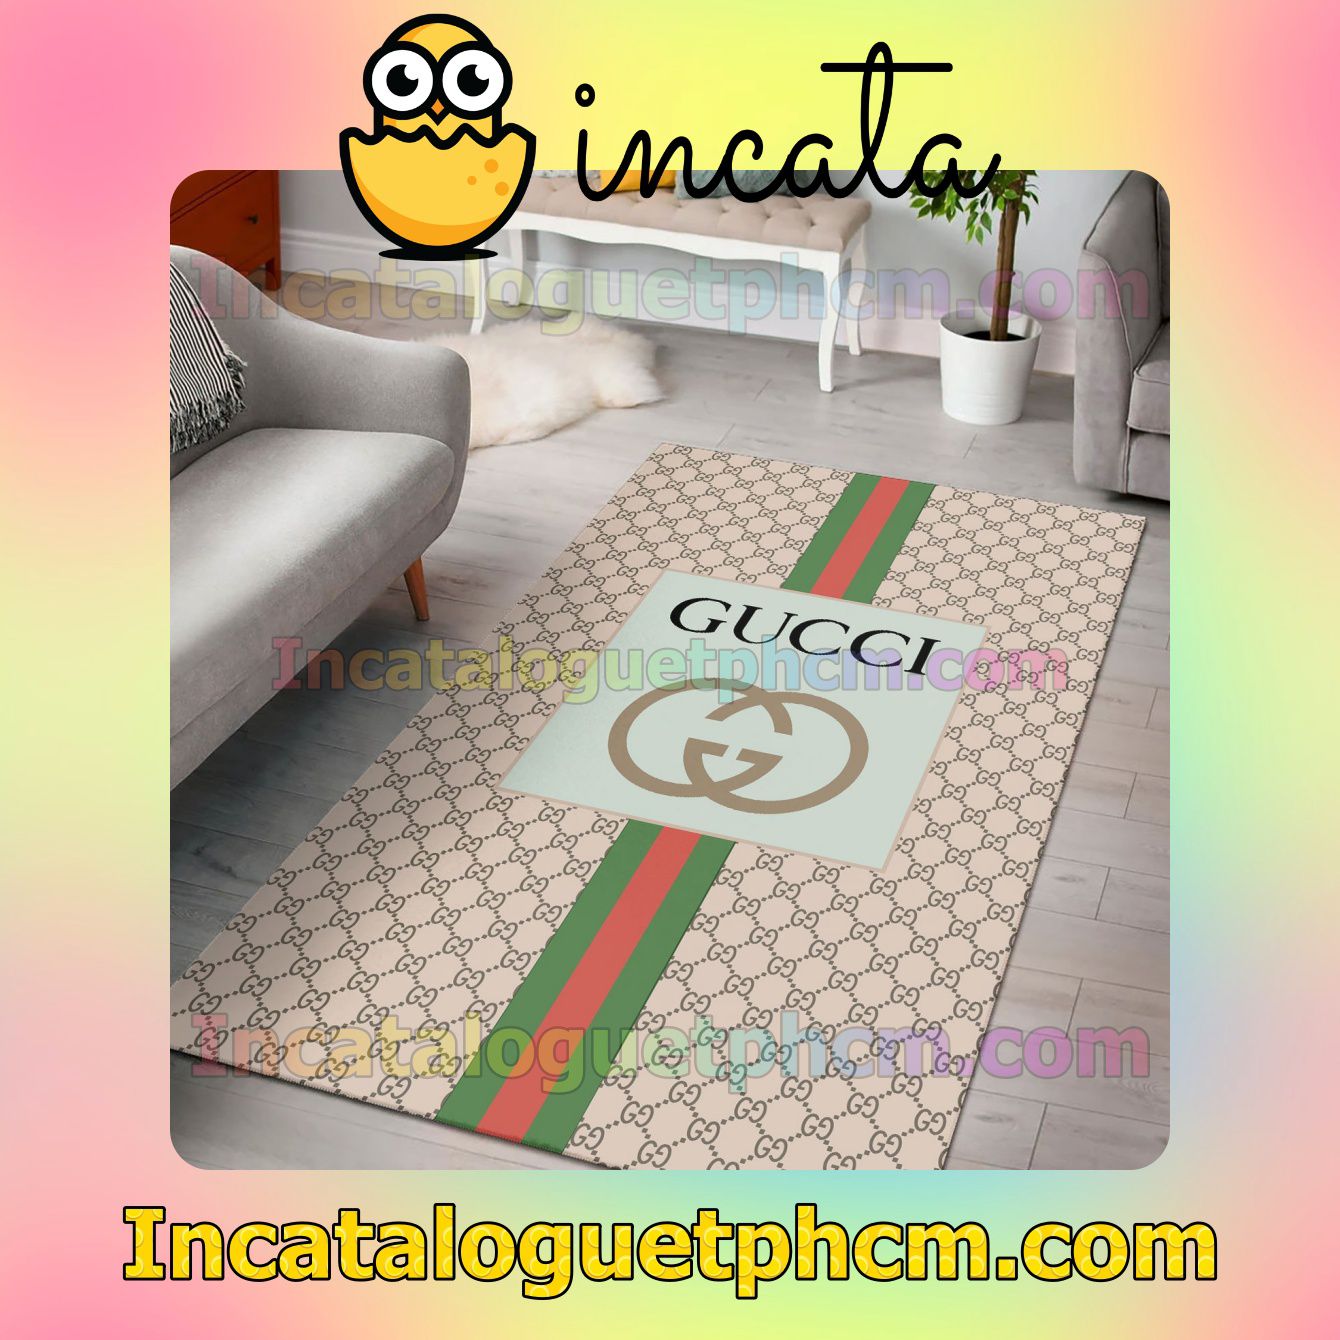 Gucci Beige Monogram With Logo In Green Square And Color Stripes Carpet Rugs For Kitchen